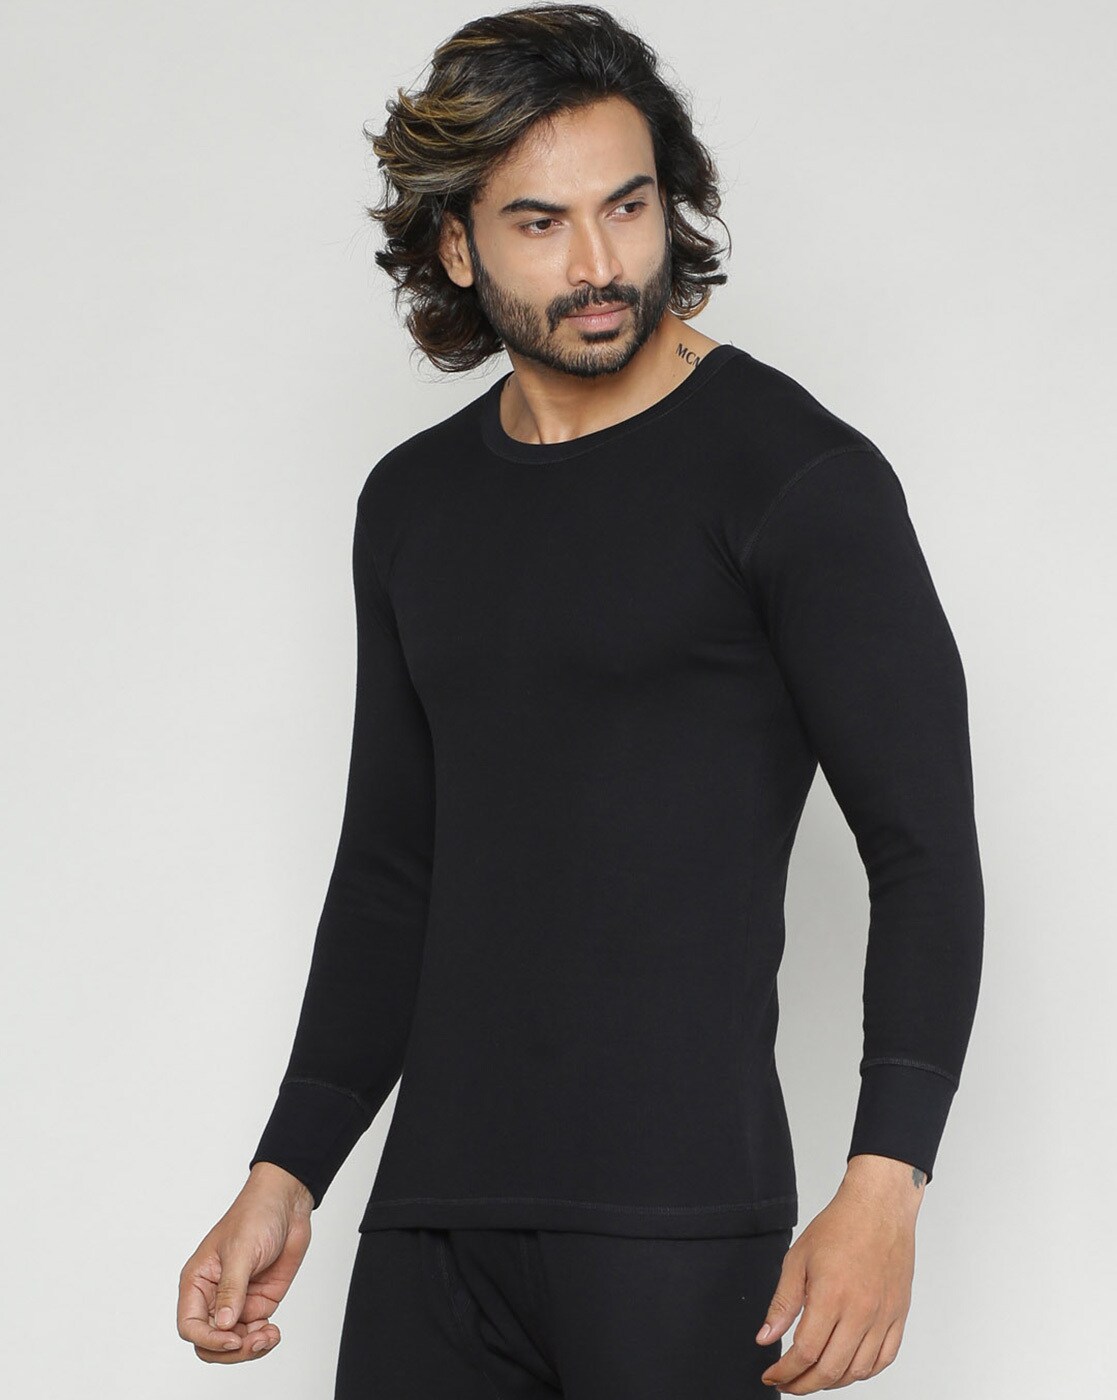 Buy Lux Inferno Men Cotton Thermal Top - Grey Online at Low Prices